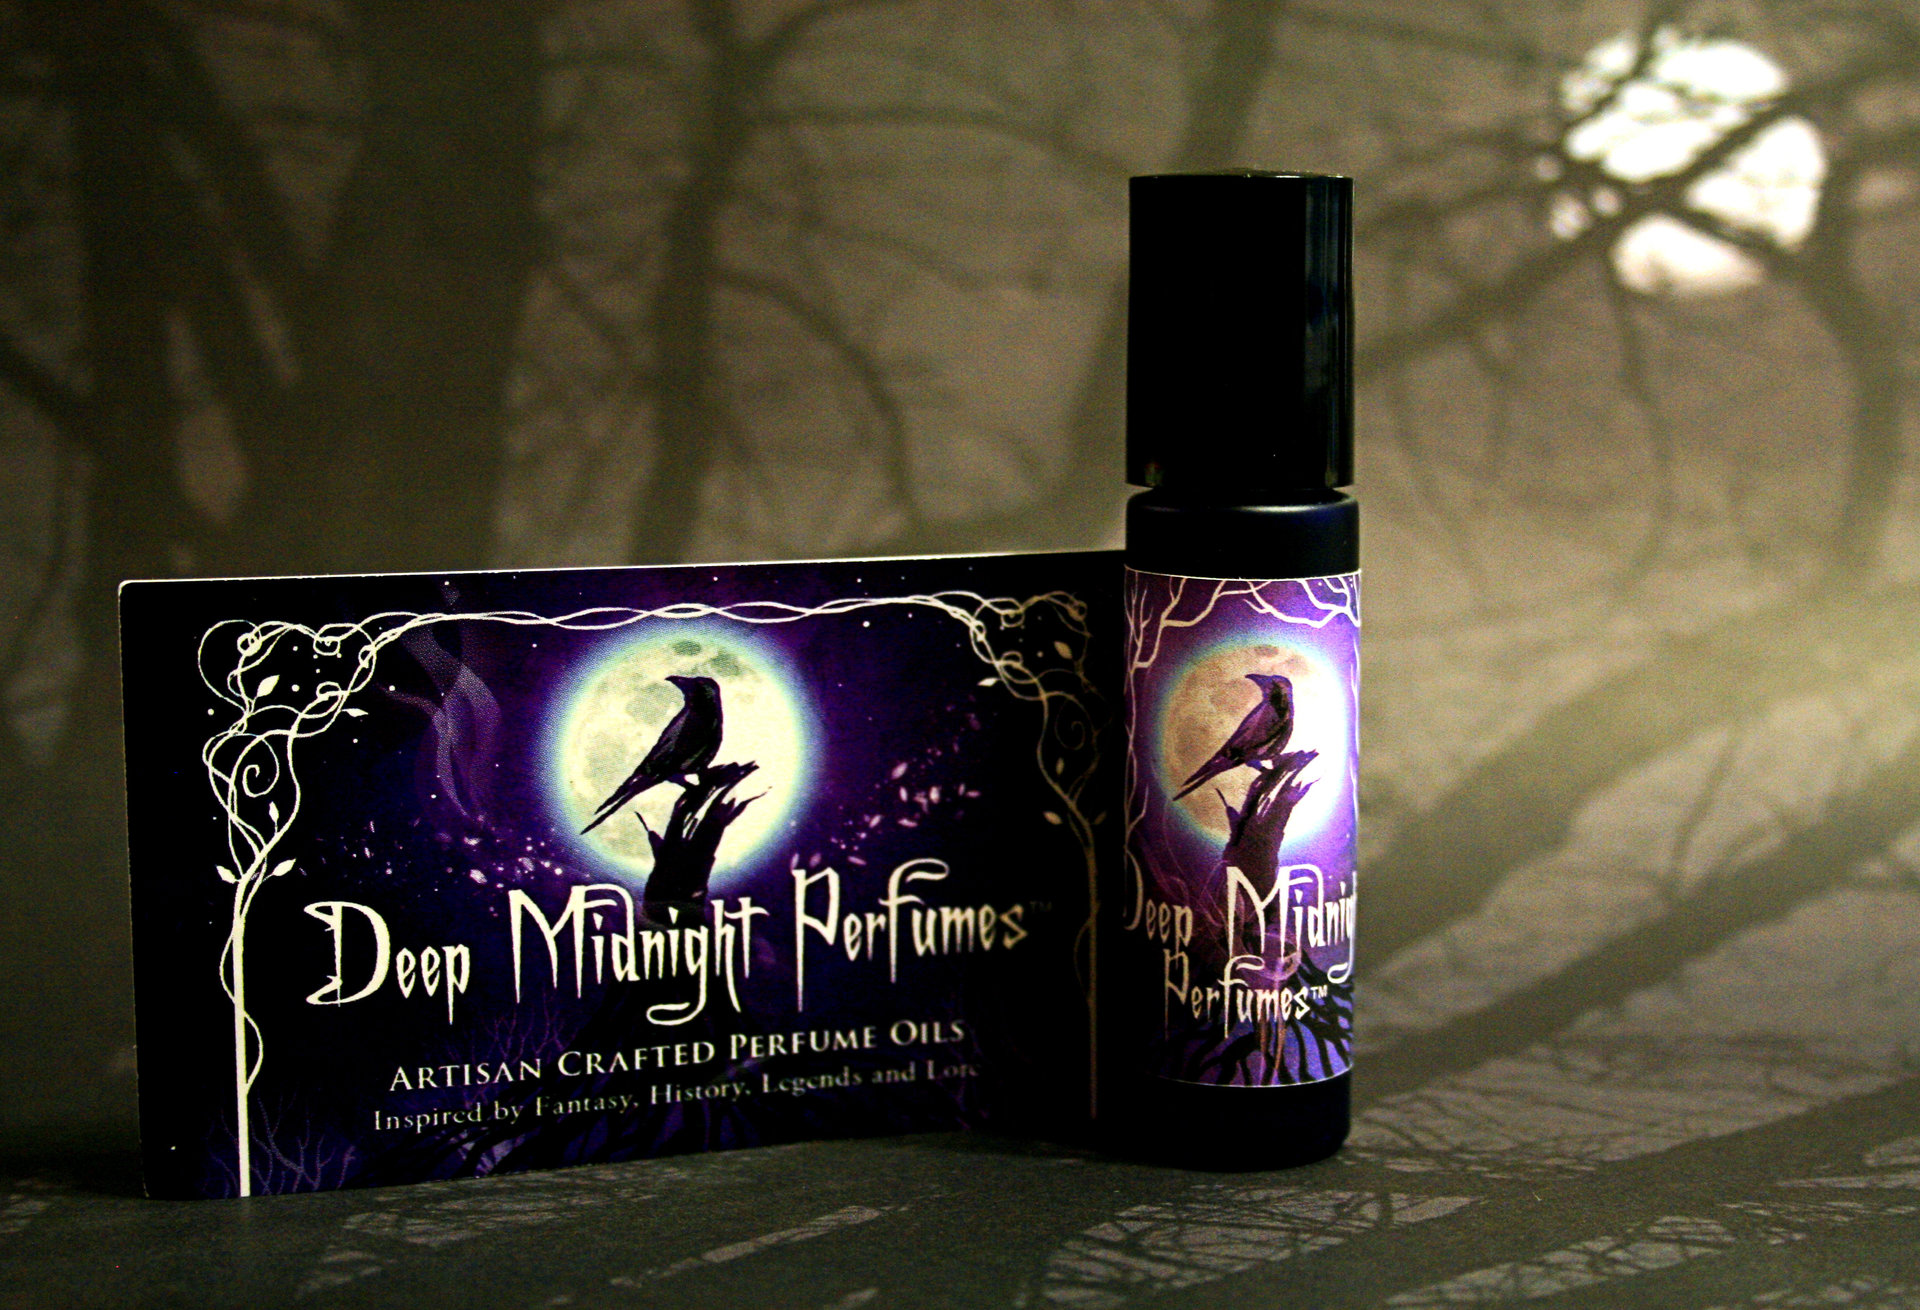 NIVENS Perfume Oil - Sweet Cakes, Pudding, Wild Berries, Spices - Gourmand Perfume - Alice - Wonderland